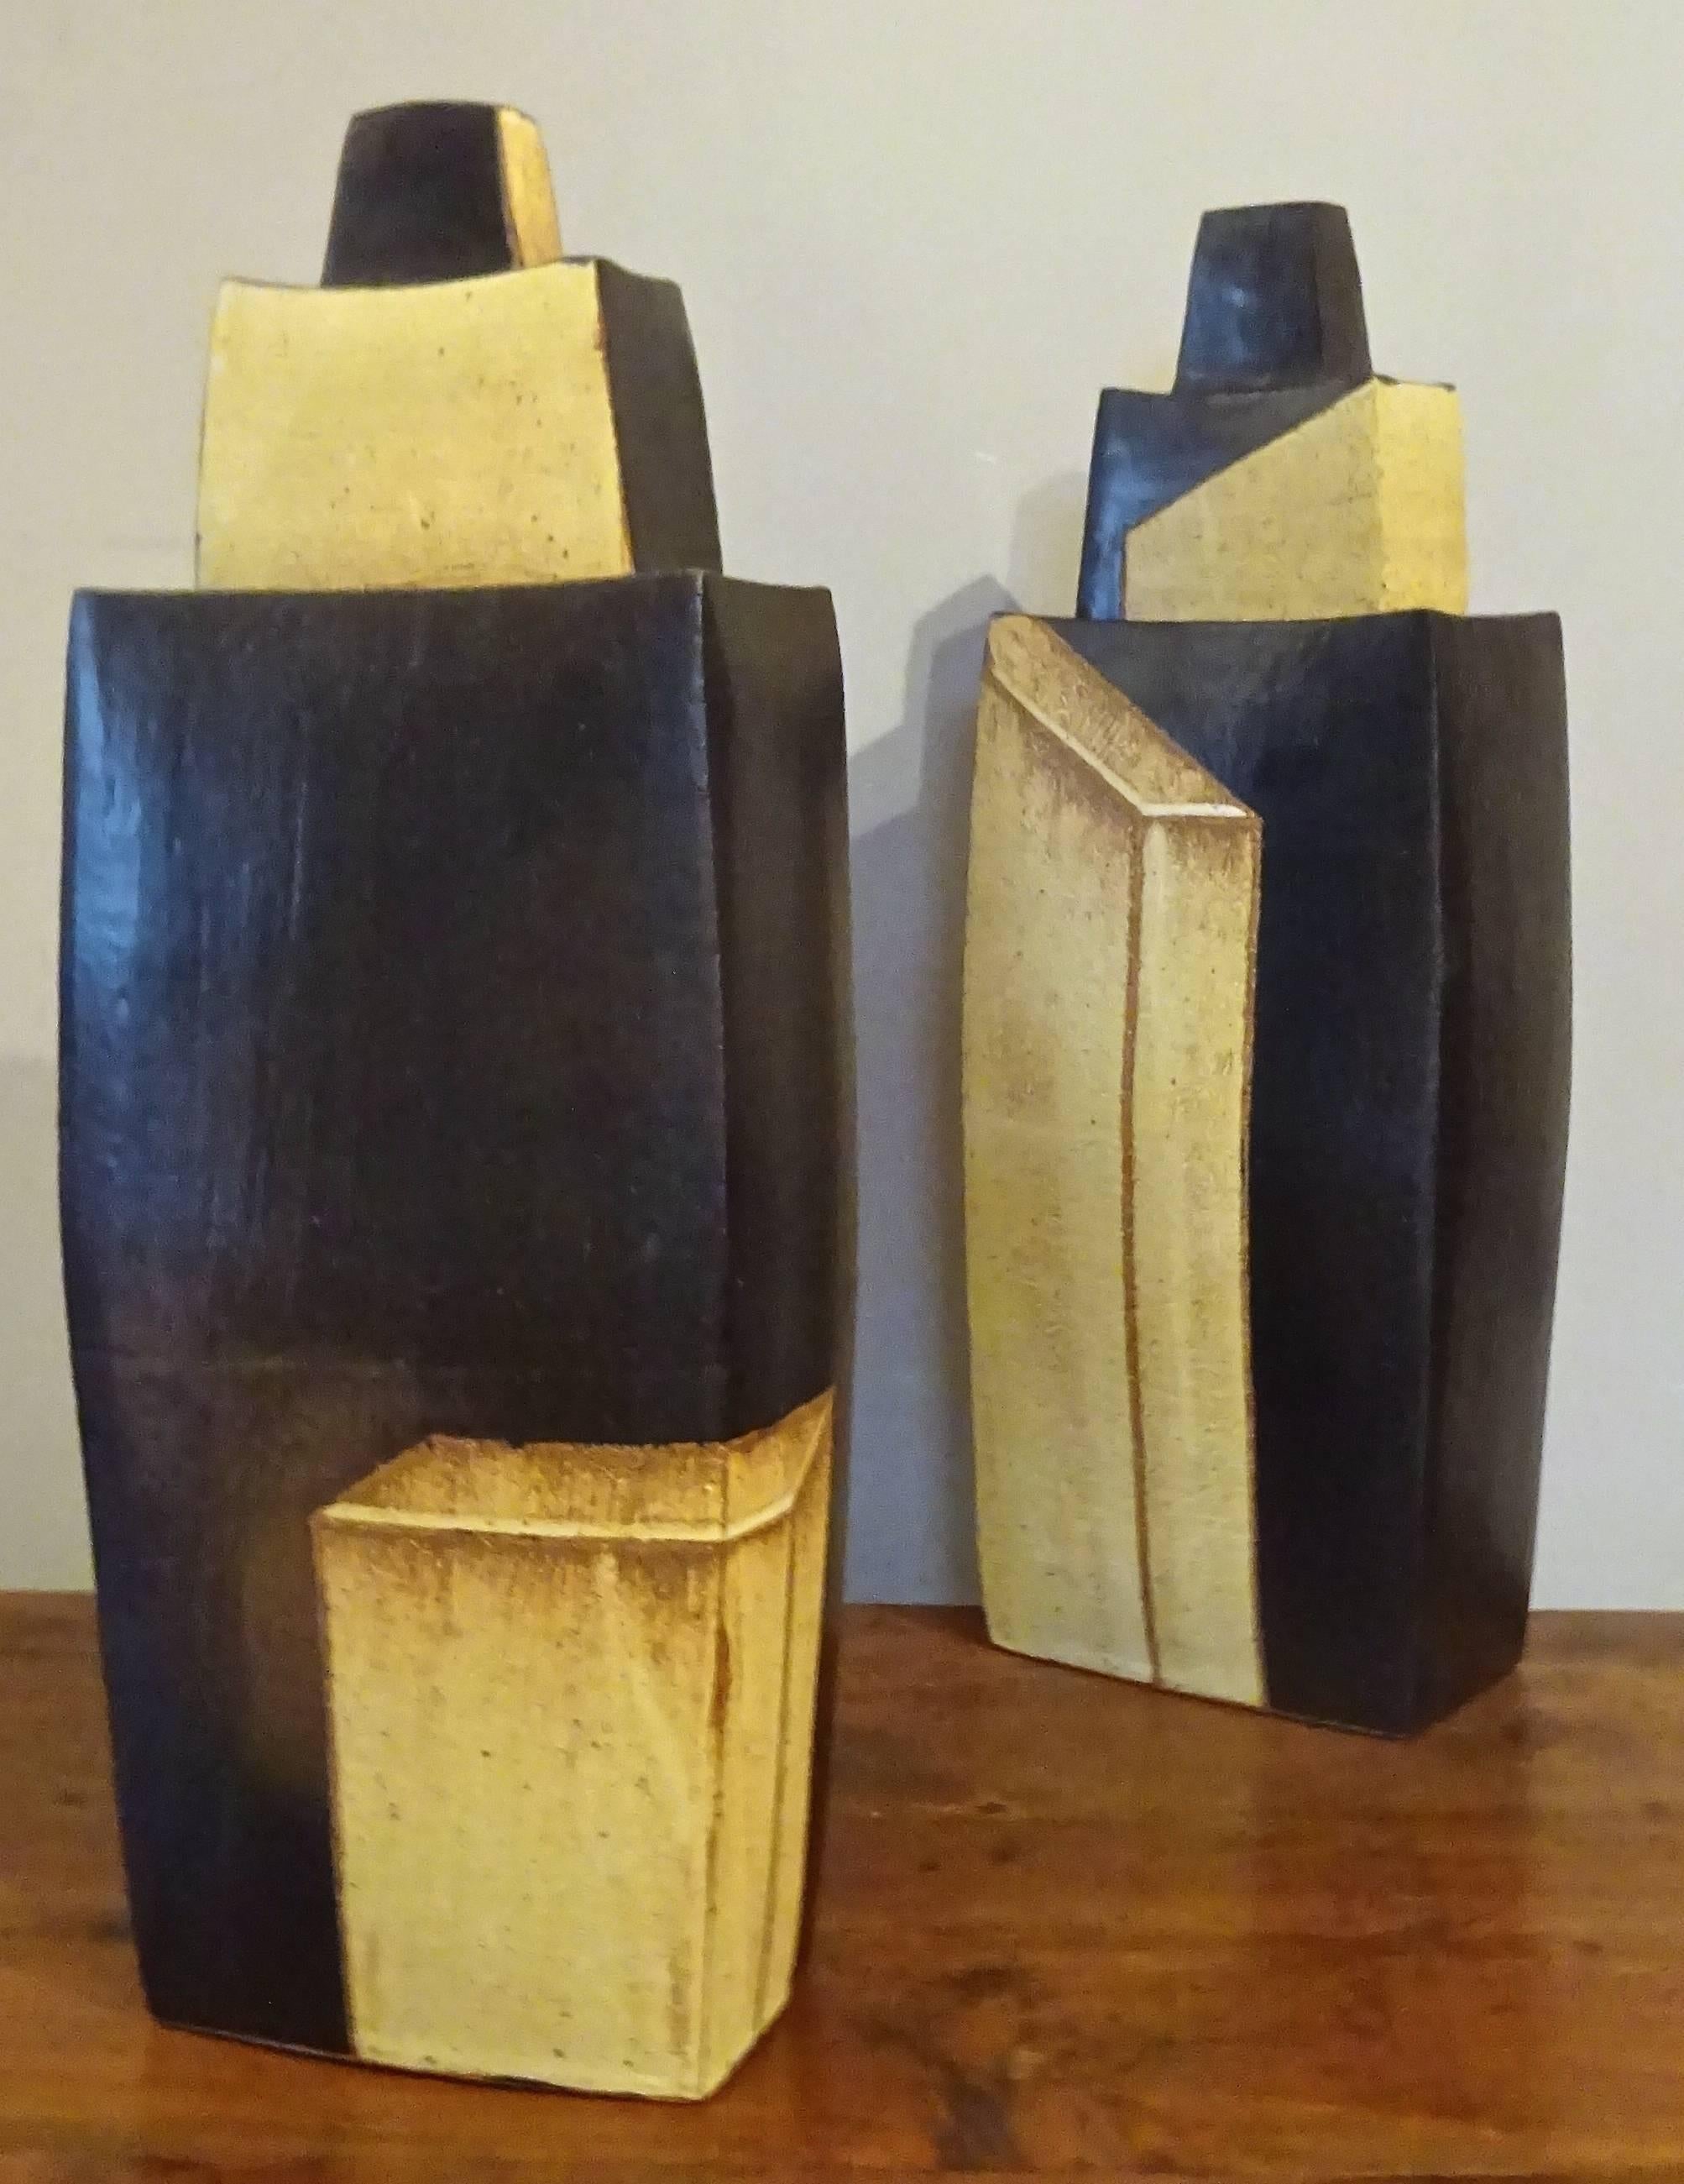 American Tall Architectural Pair of Sequoia Miller Art Pottery Covered Urns, 2009